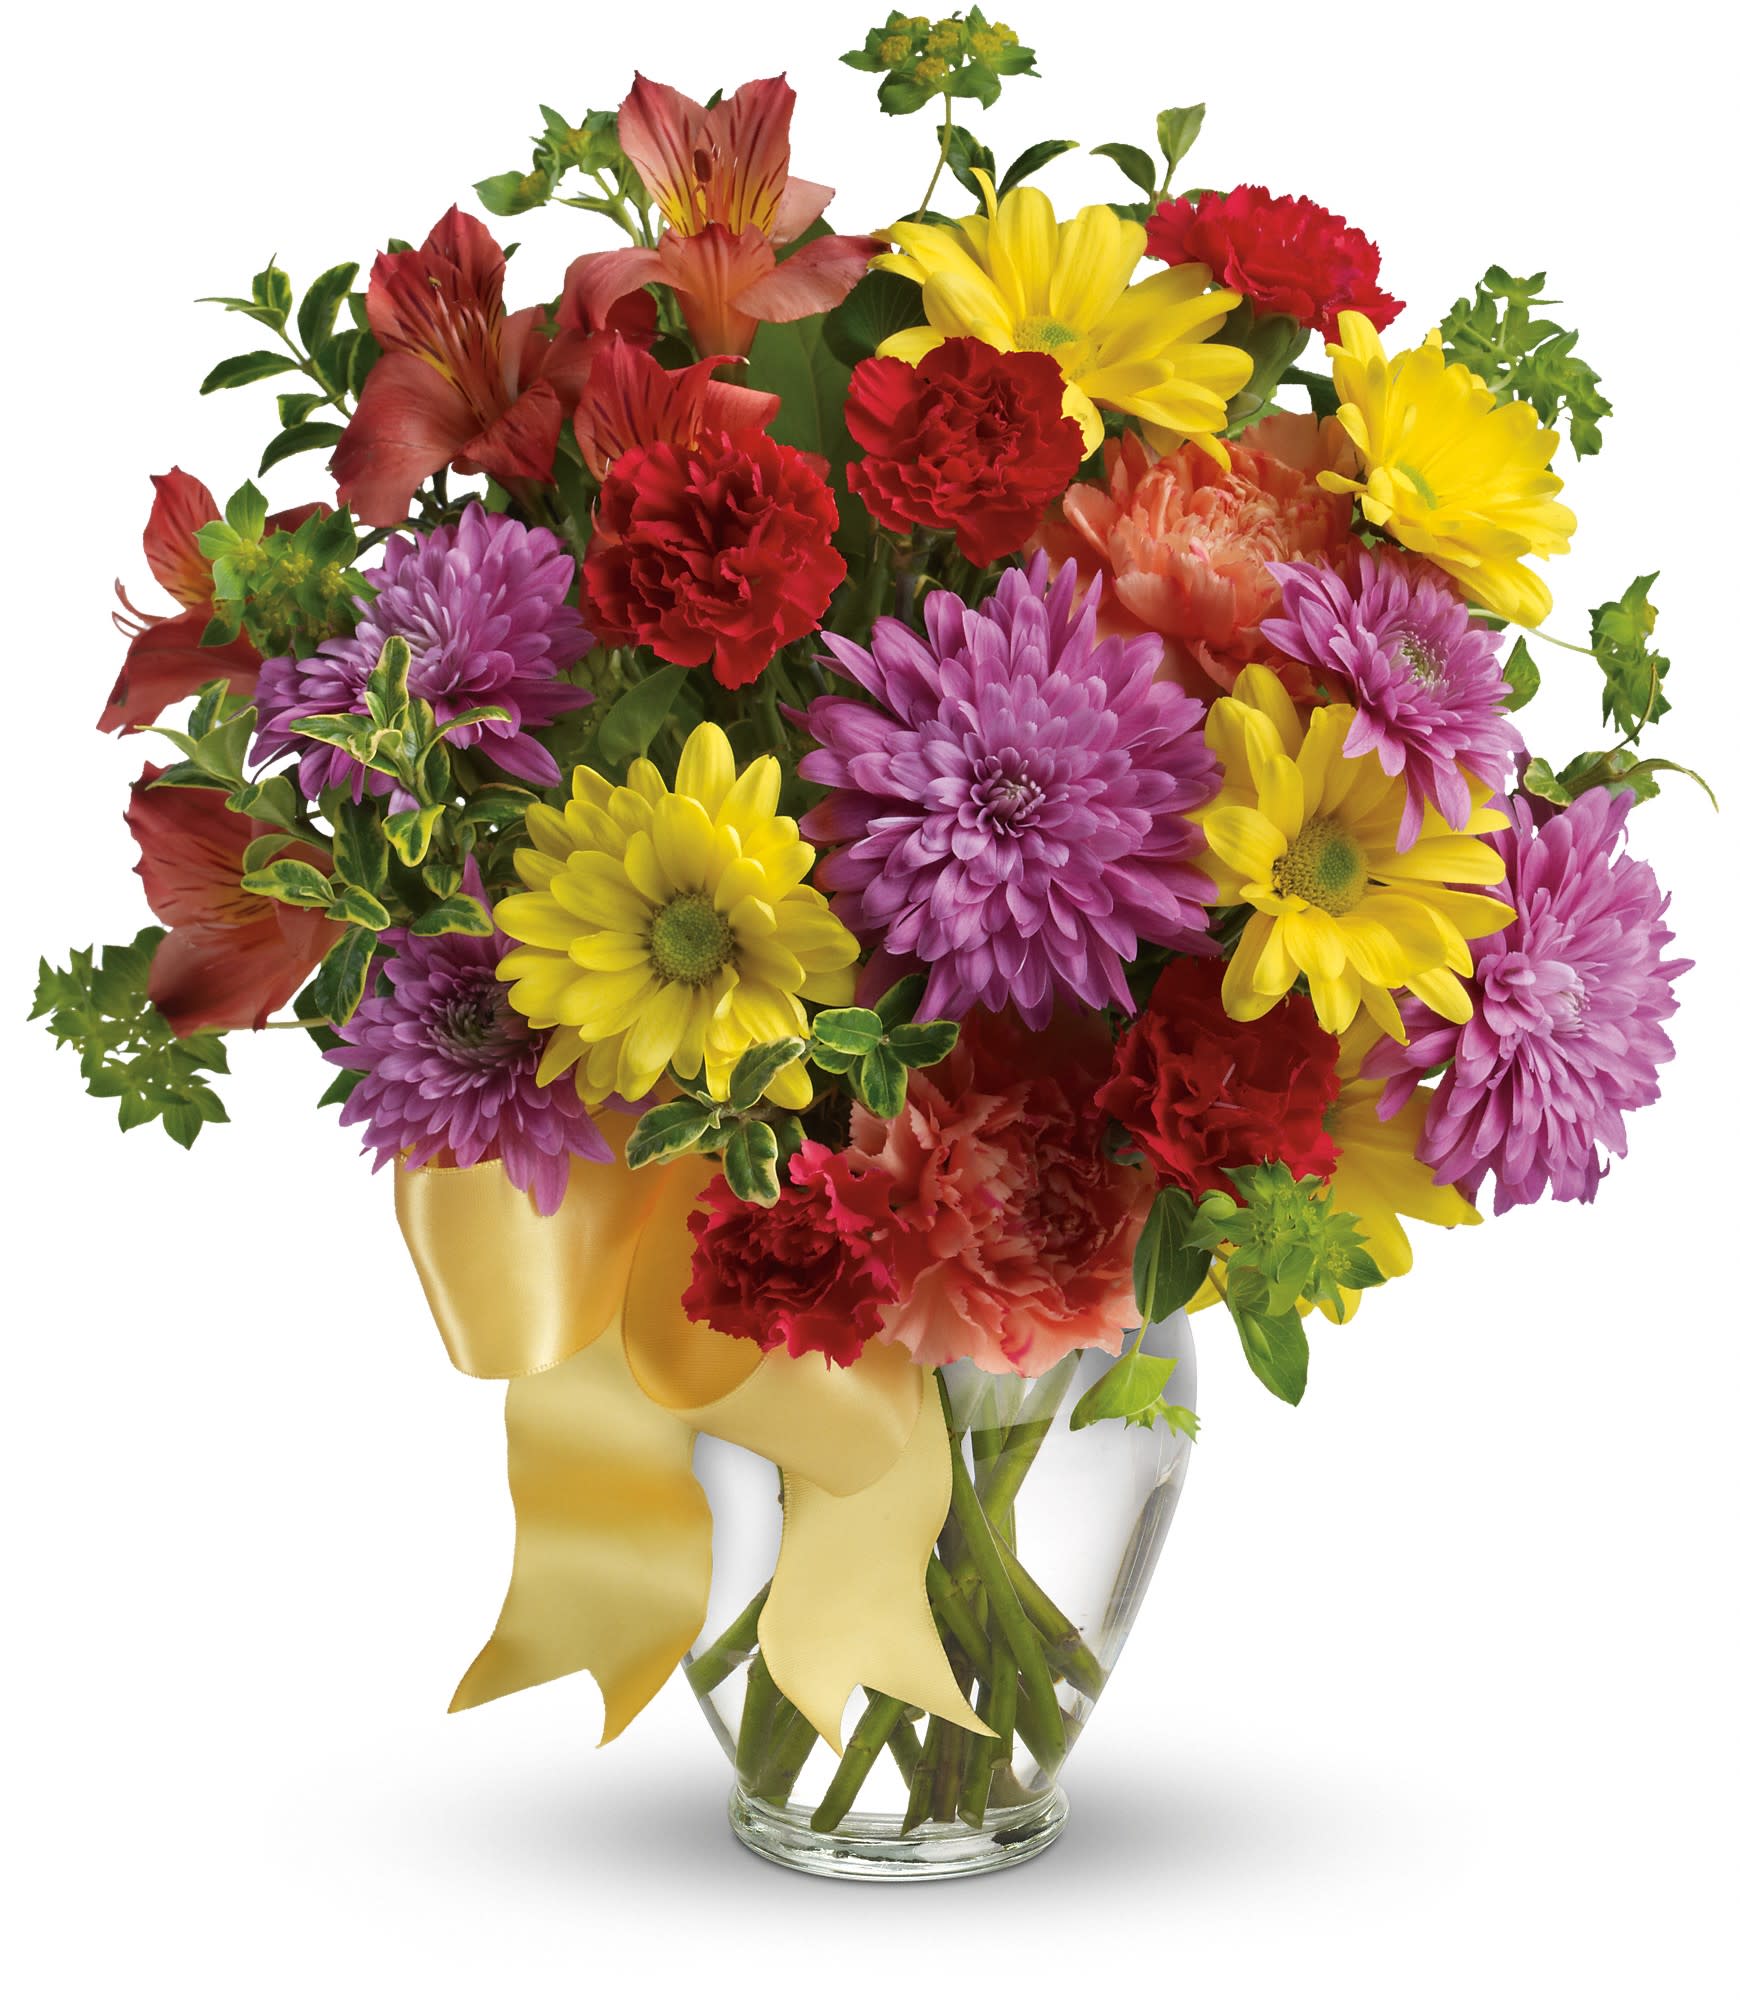 Color Me Yours - Color her overjoyed when this beautiful bouquet is delivered to her door! Sunny reds, oranges and yellows create a heartwarming mix to remind her just how special she is.